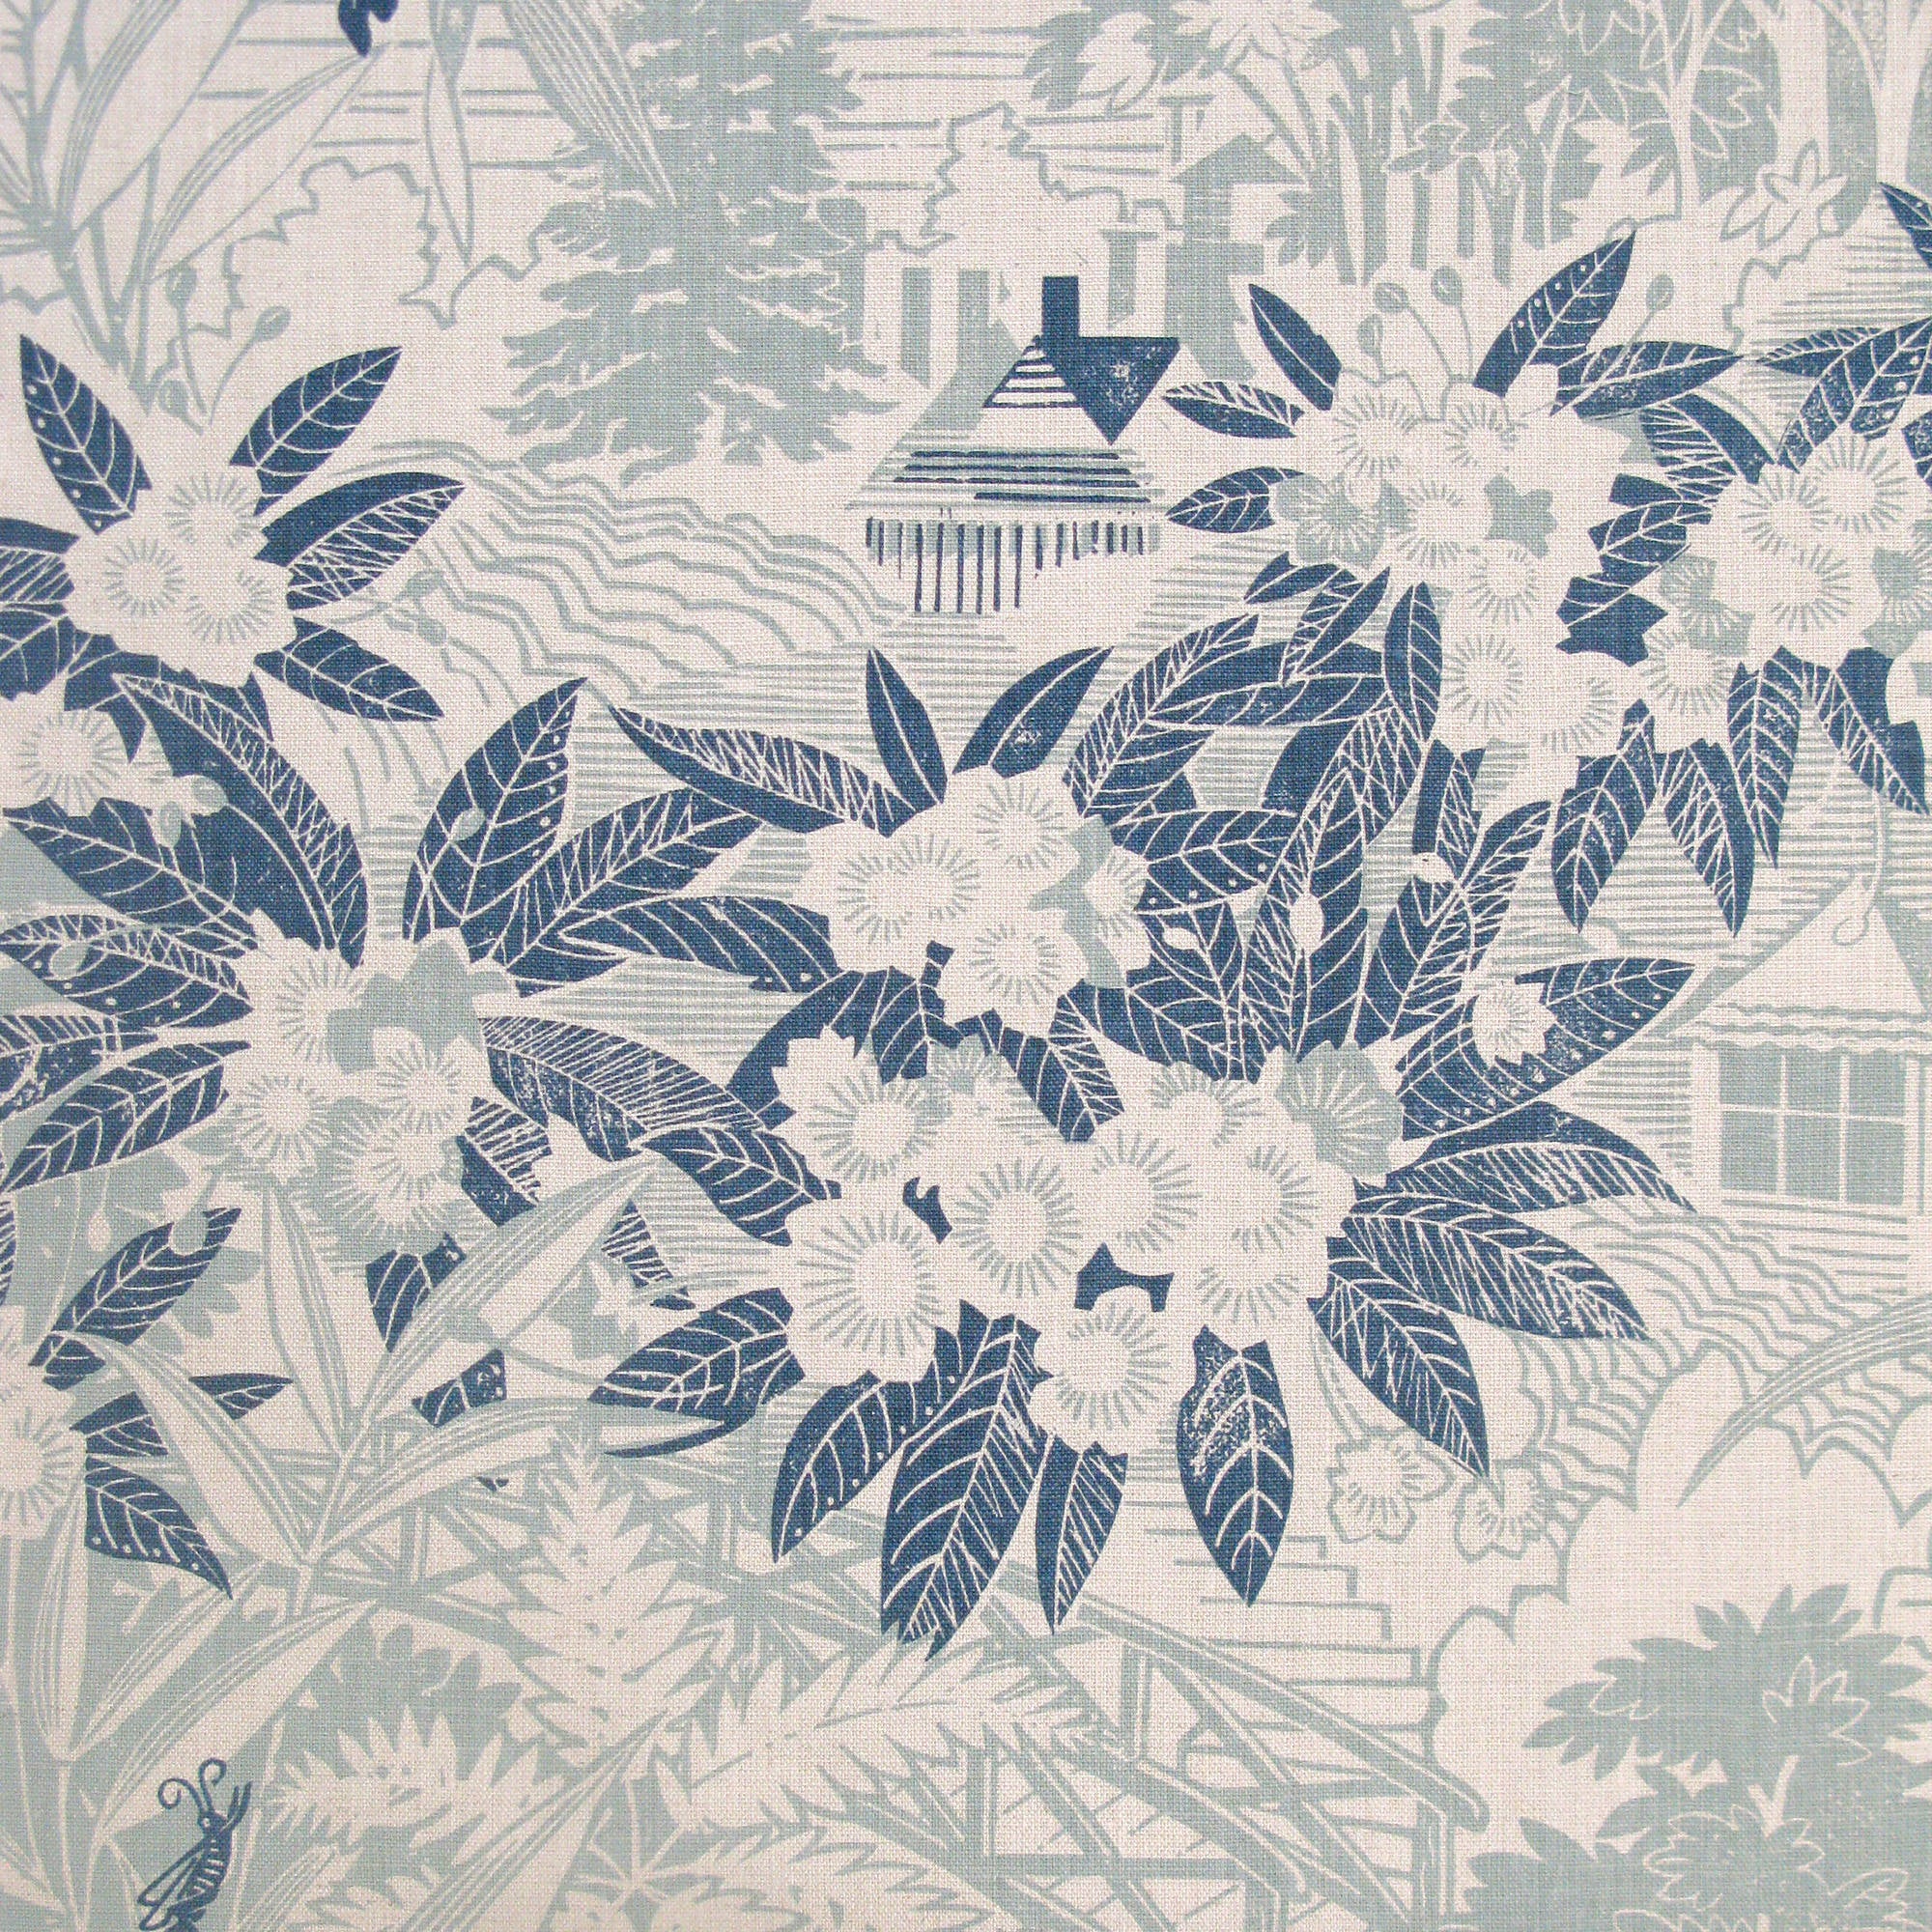 Detail of fabric in an intricate botanical, bridge and house print in navy and blue-gray on a cream field.